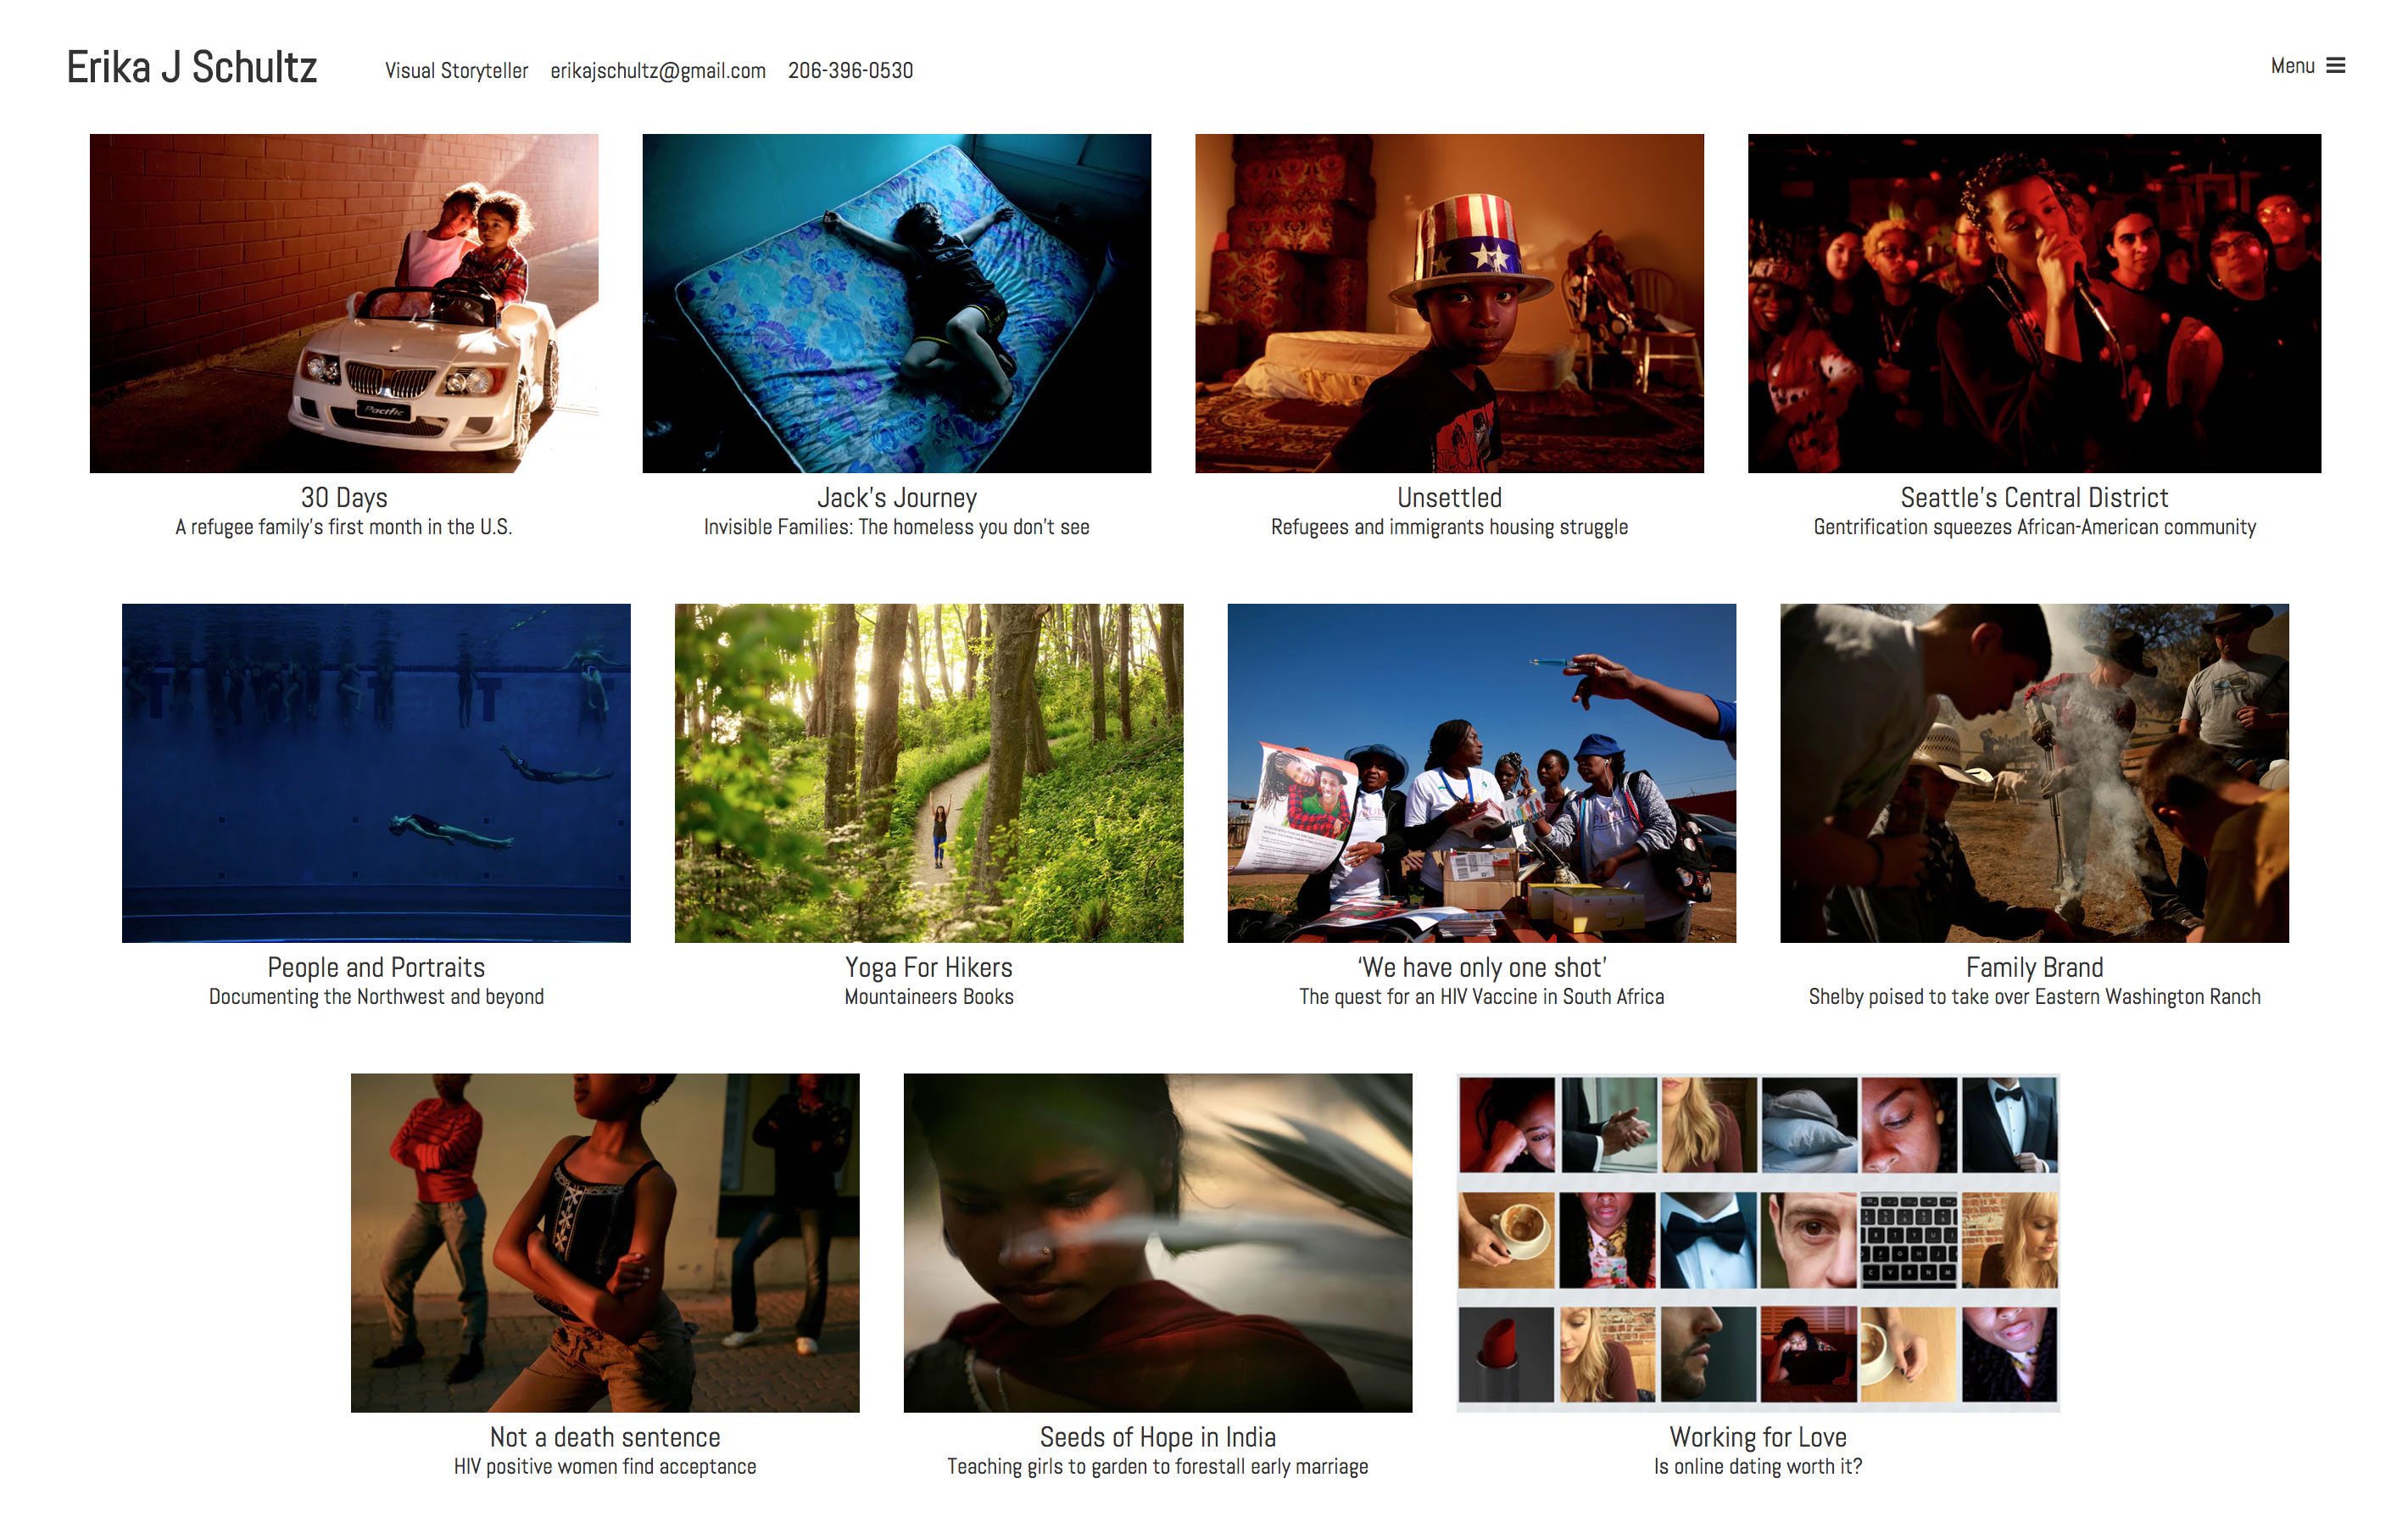 Screenshot of Erika Schultz's portfolio landing page with a grid of images from various projects